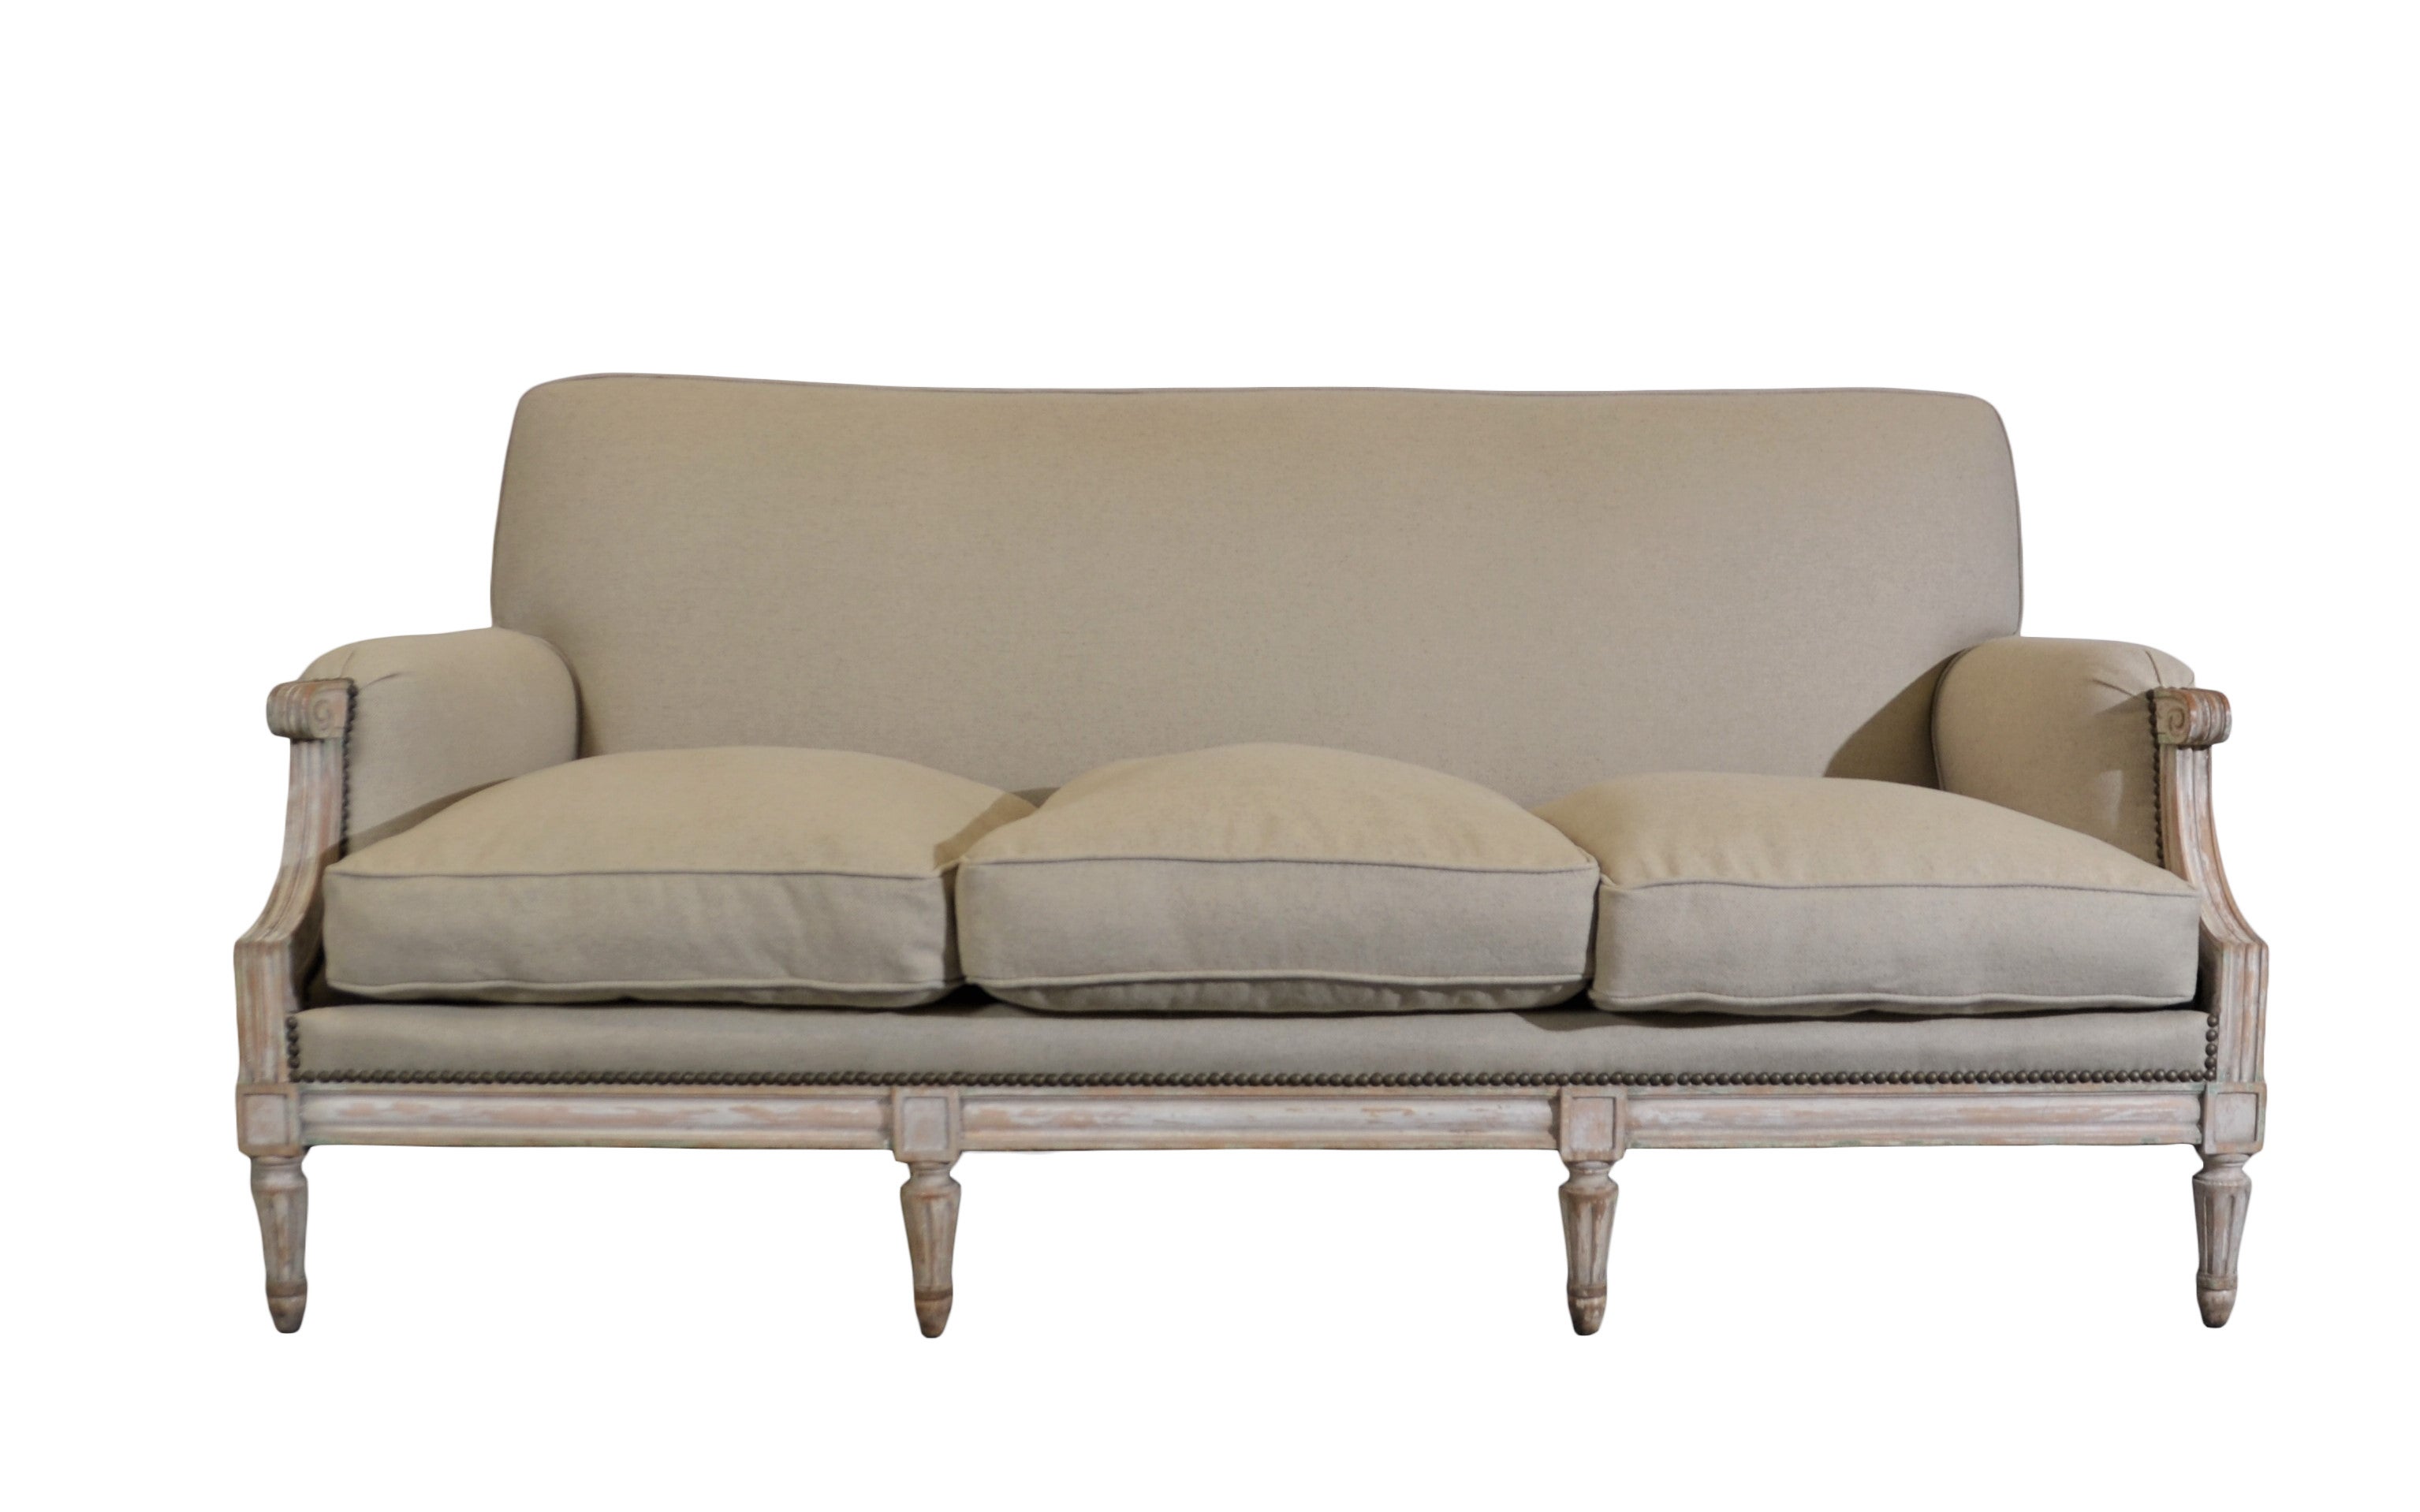 Louis xvi style French sofa. The wood frame has a natural finish with white paint. Newly upholstered with nailheads. 